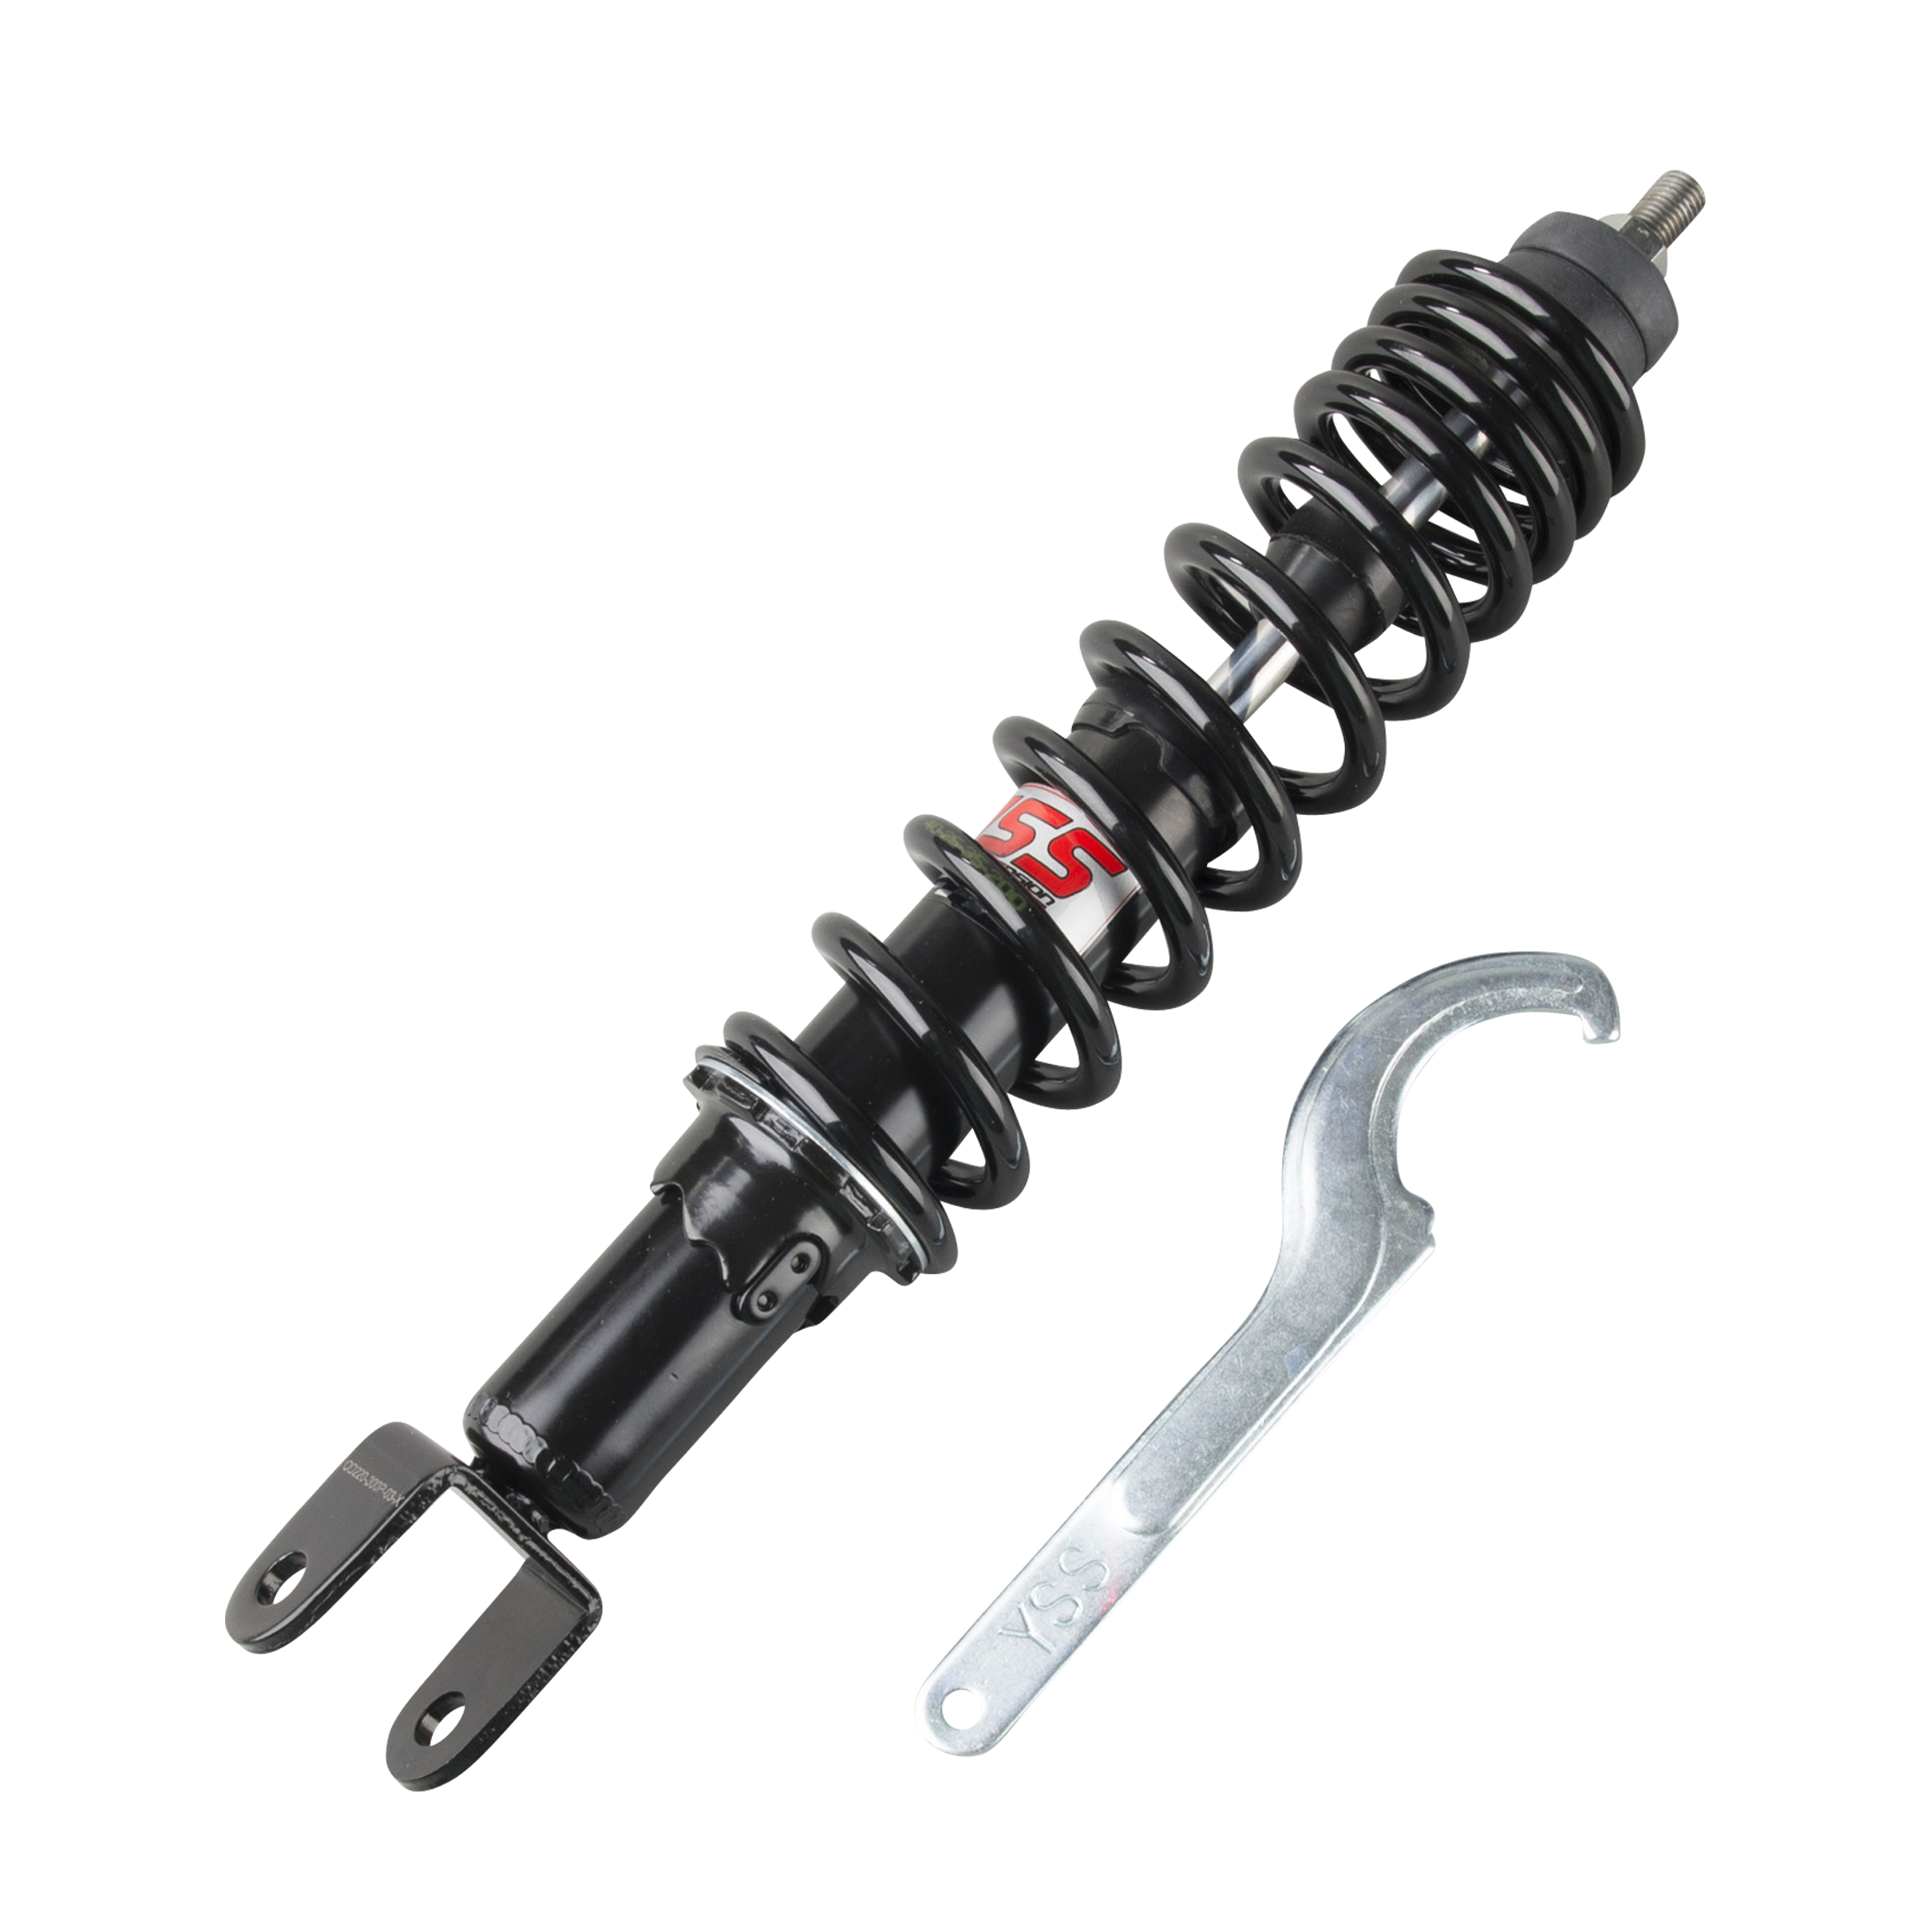 YSS Adjustable Rear Shock Absorber Mono 270 mm - Buy now, get 2% off